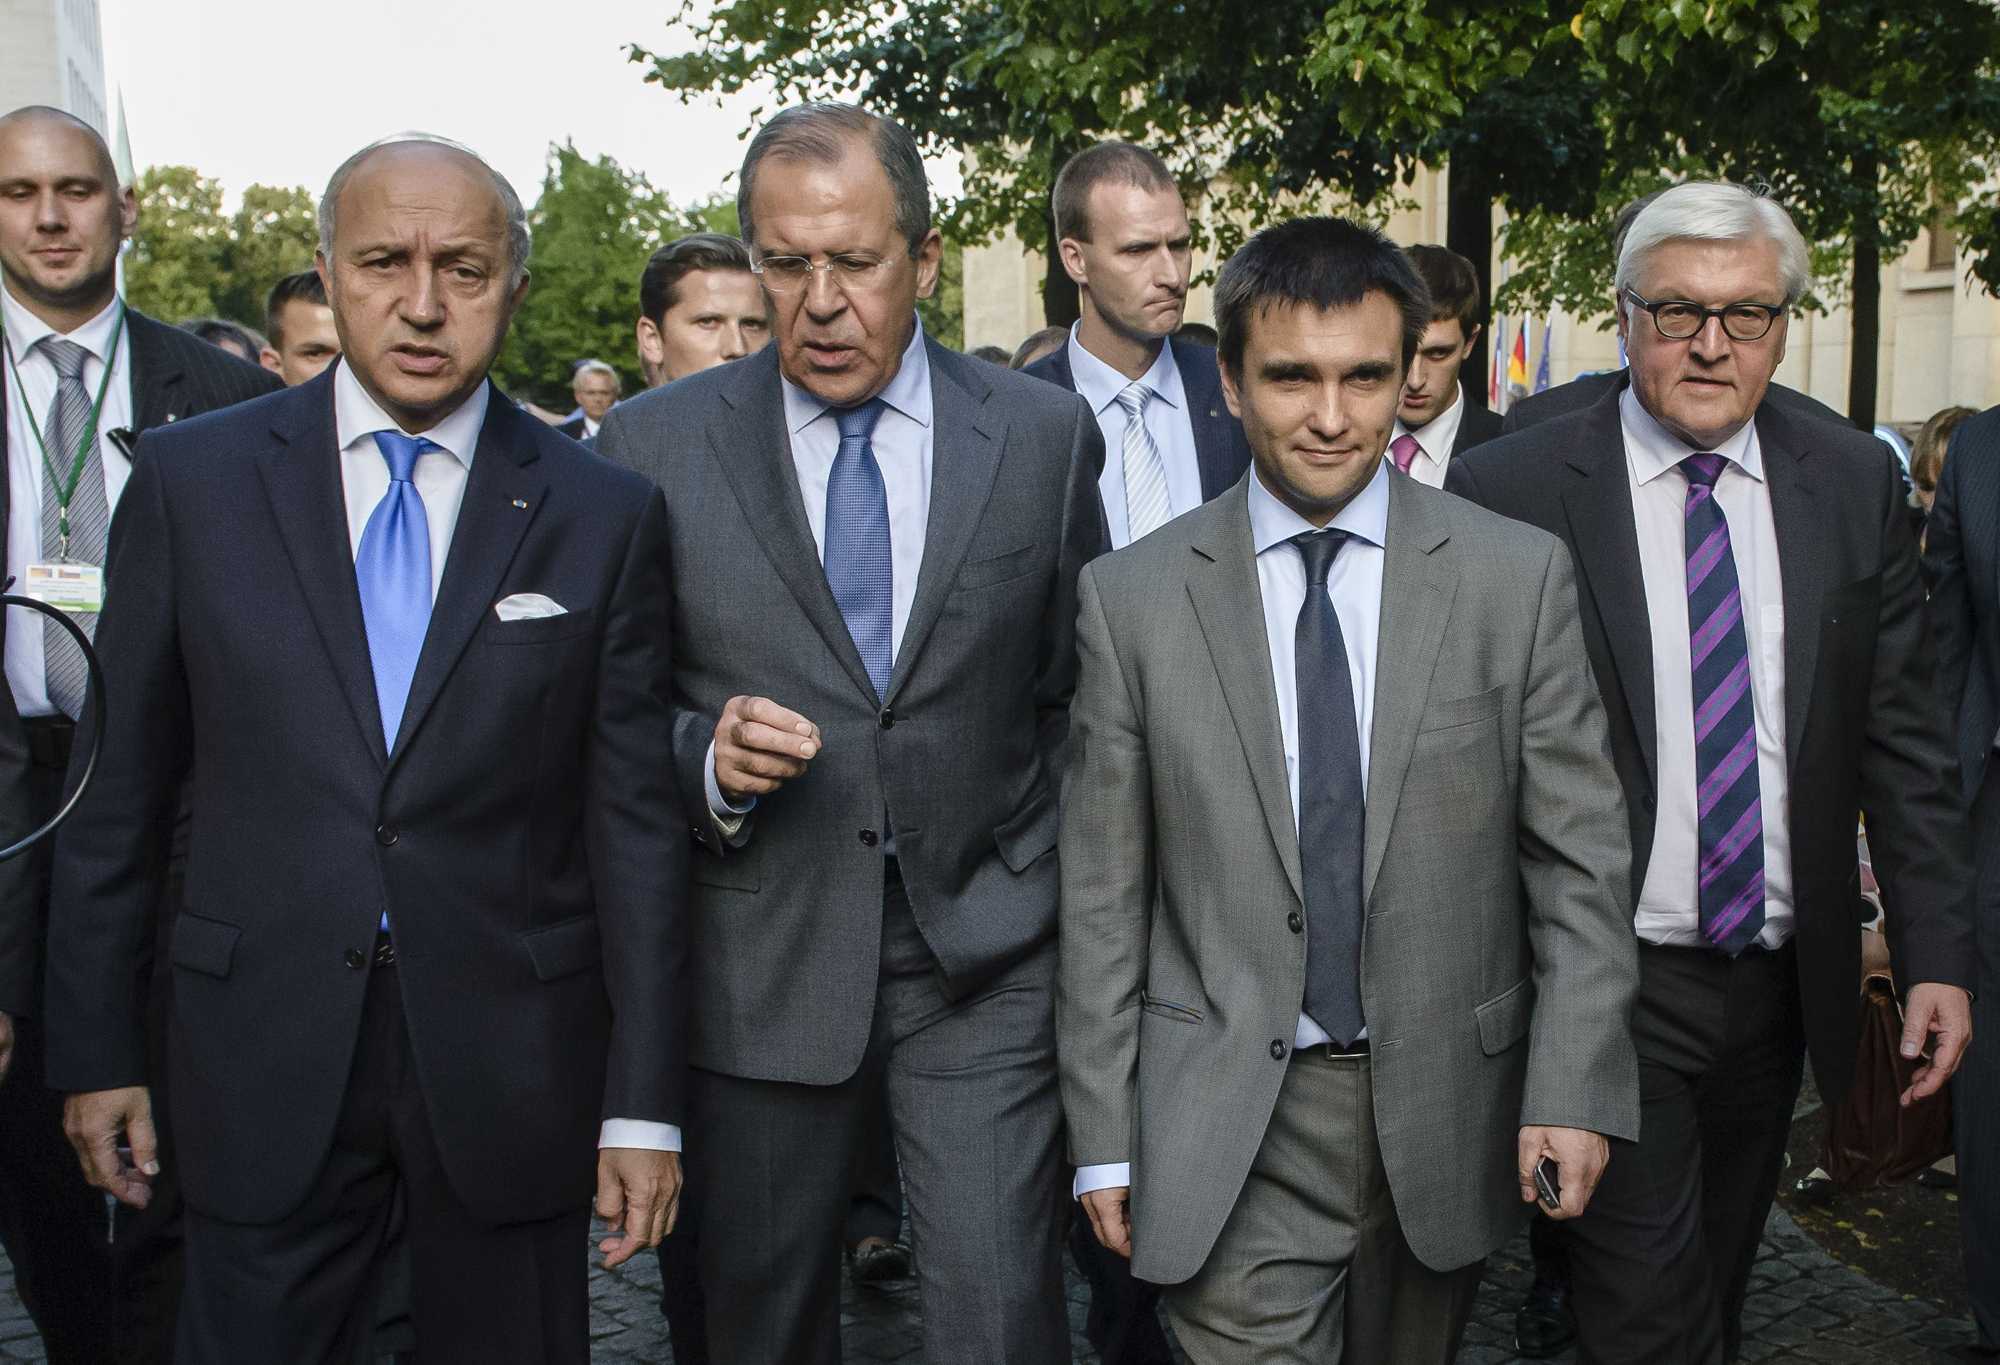 French Foreign Minister Laurent Fabius, Russian Foreign Minister Sergei Lavrov, Ukrainian Foreign Minister Pavlo Klimkin and German Foreign Minister Frank-Walter Steinmeier leave the Federal Foreign Office after a joint press conference in Berlin on July 2, 2014.